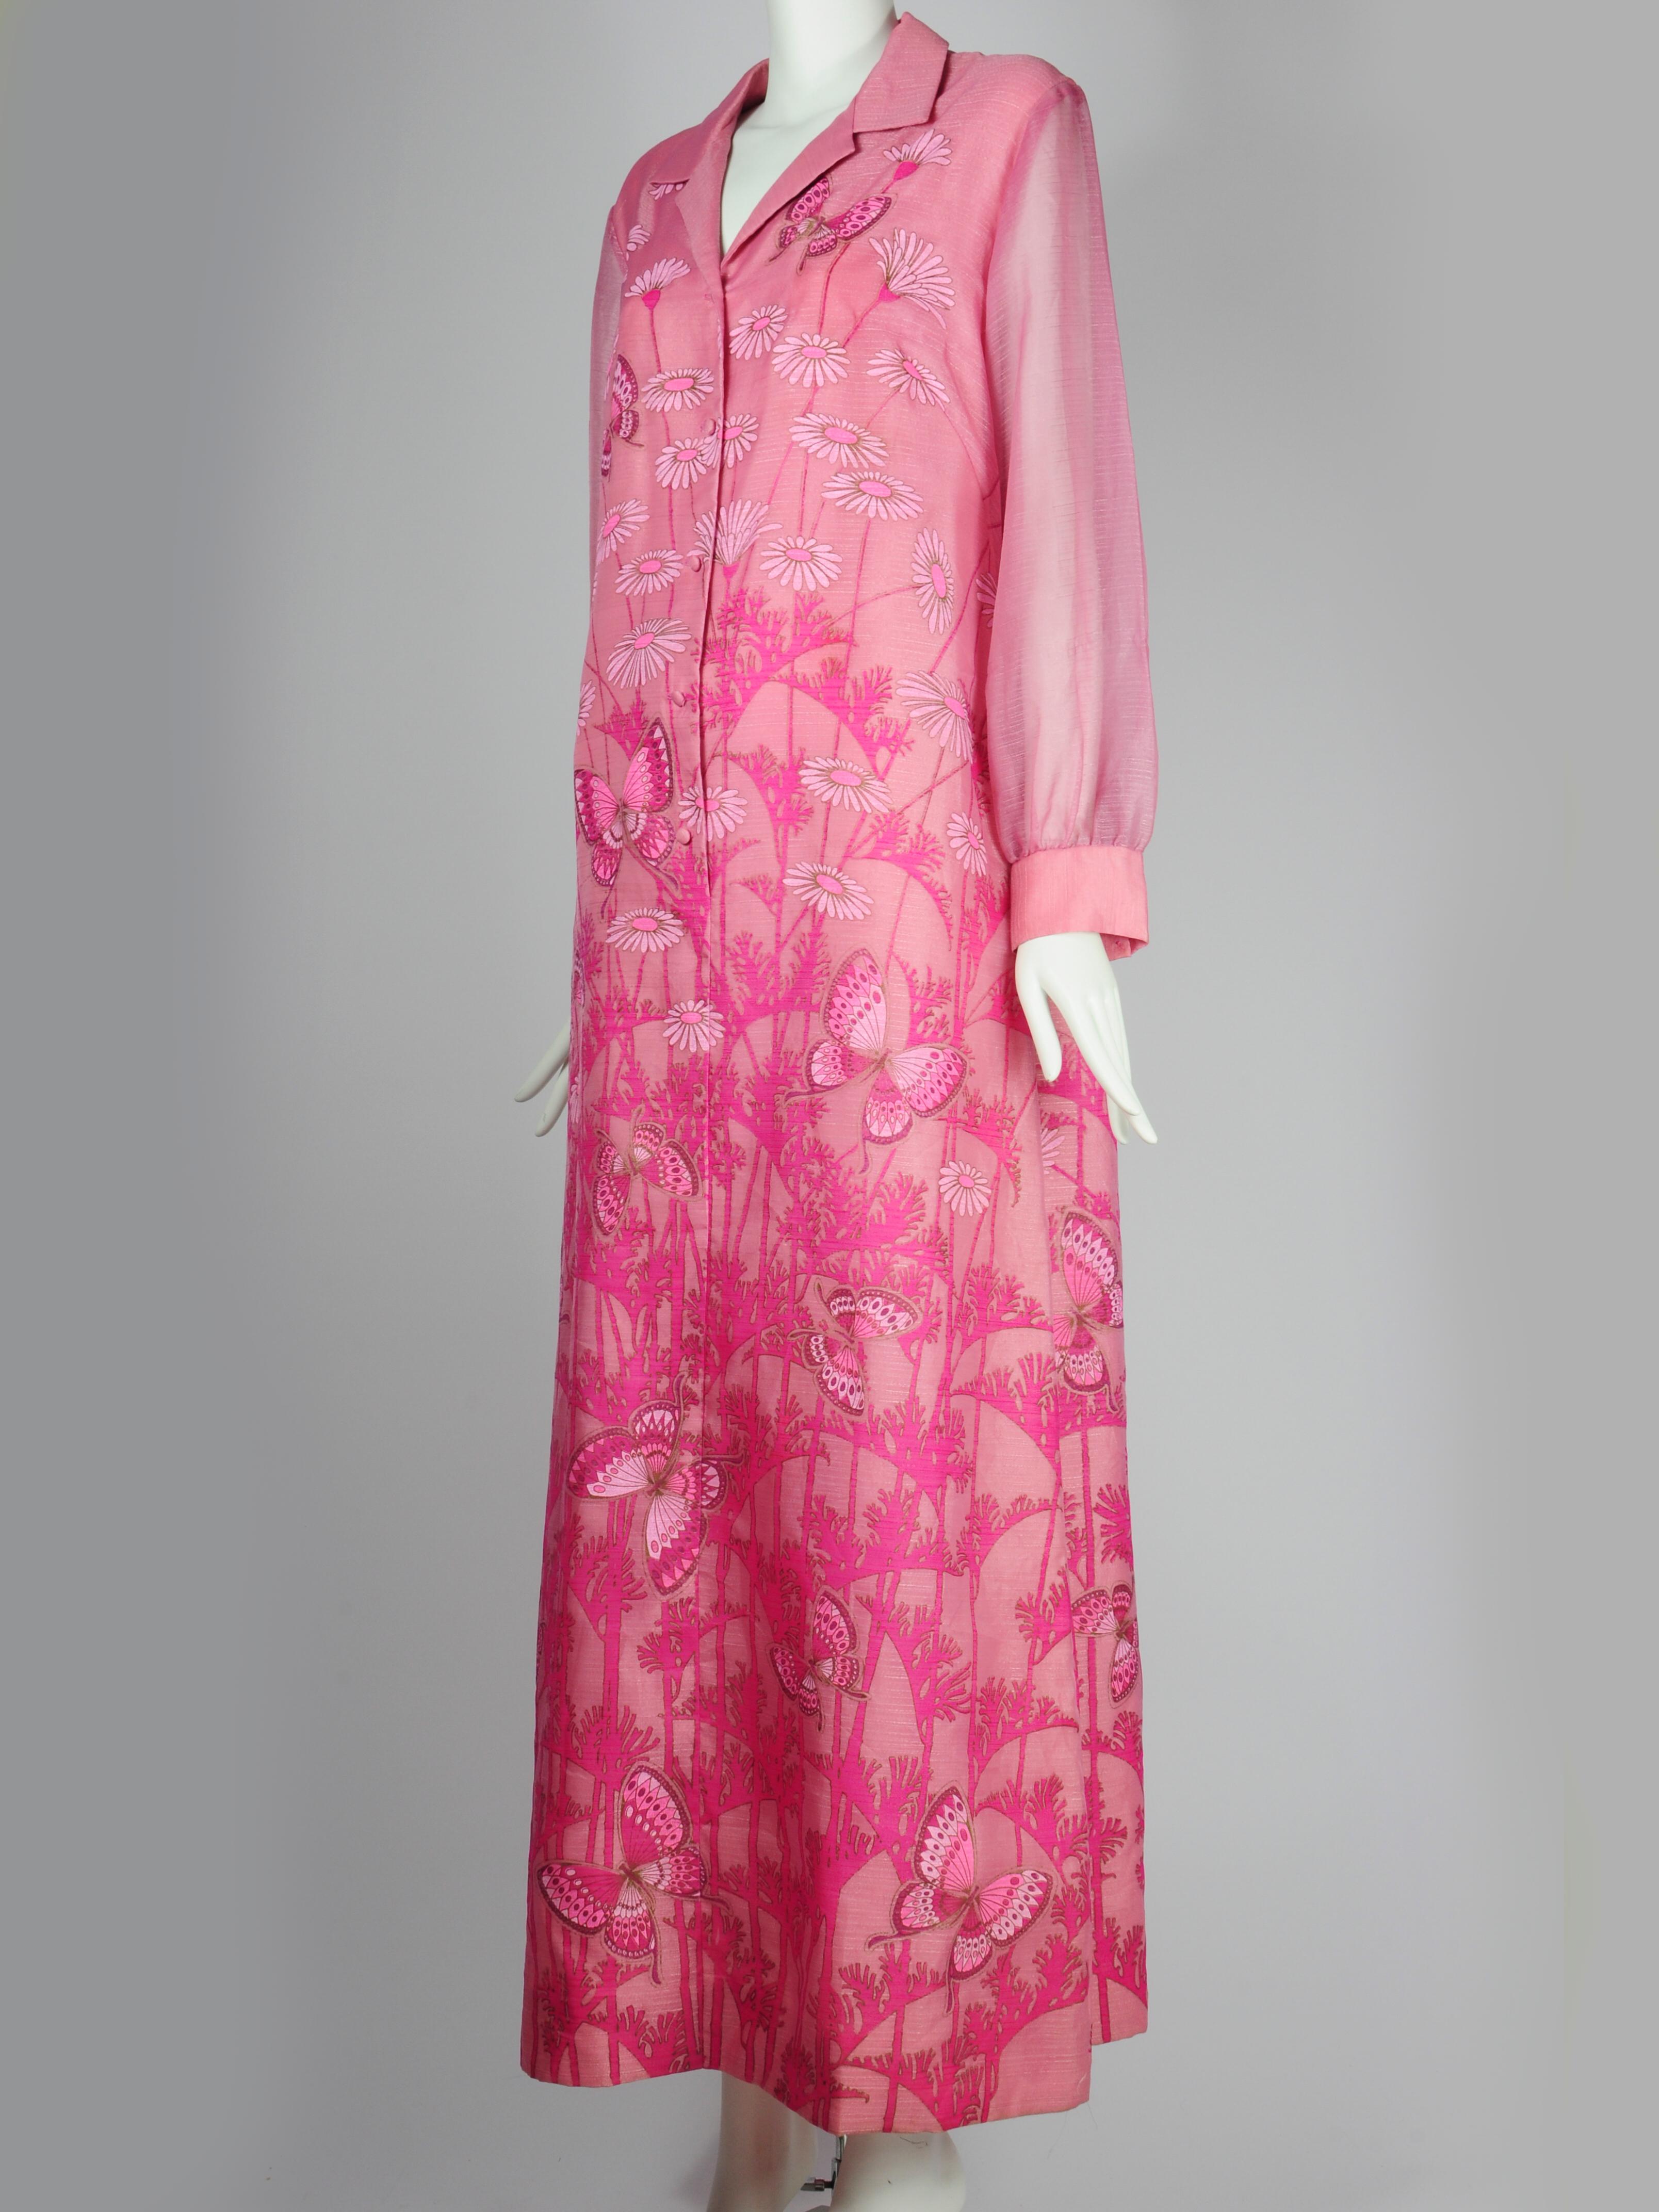 Alfred Shaheen Hawaii California maxi dress with butterfly and floral print in dusty pink. This dress was hand printed as was common practice for the Alfred Shaheen brand. The print placement is beautiful, and th print continues seamlessly over the